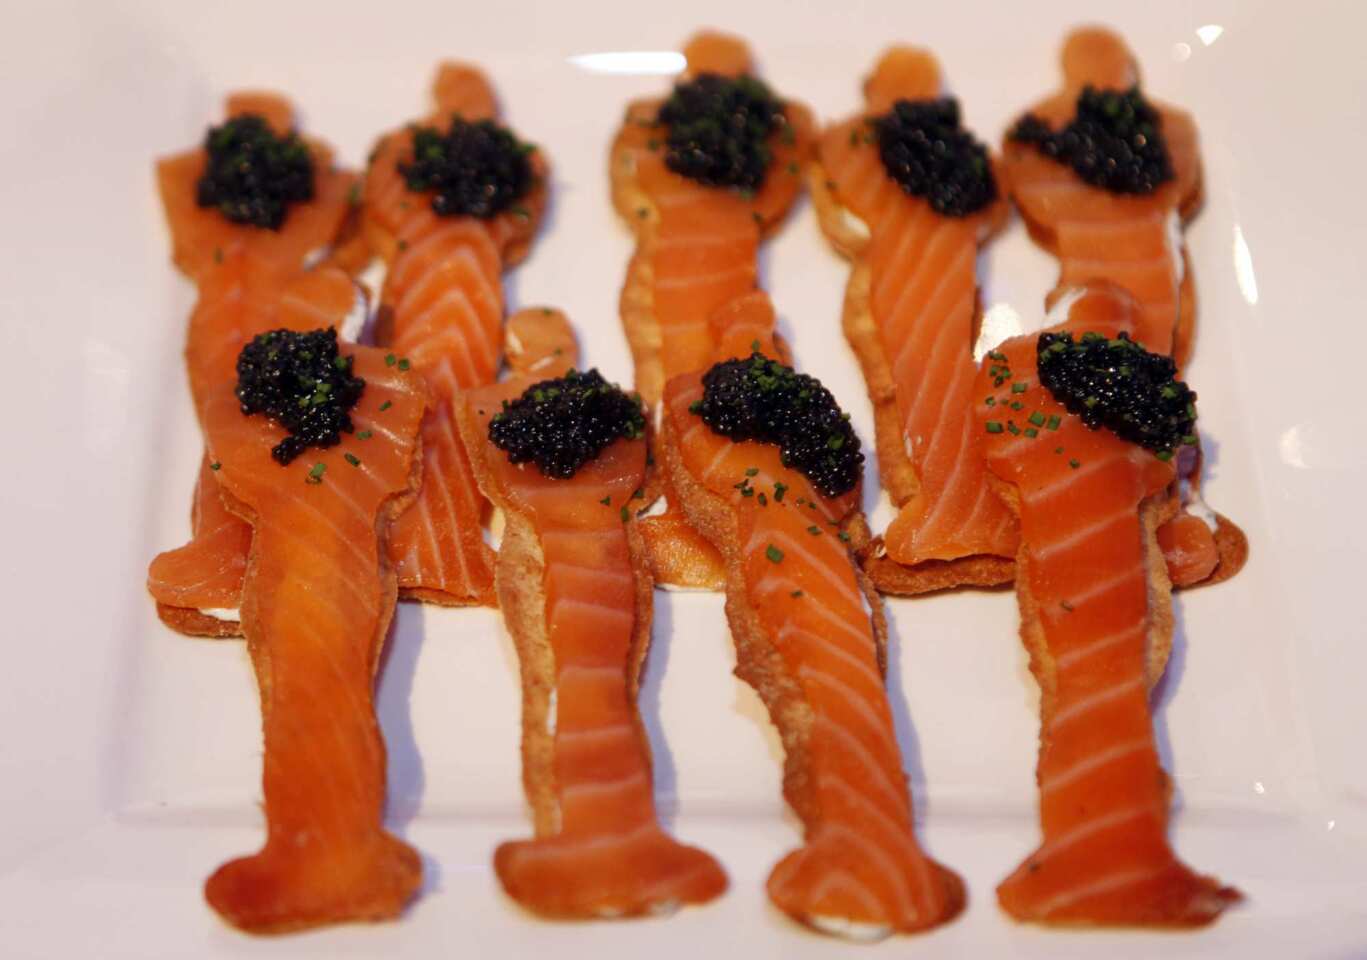 Smoked salmon is served on Oscar-shaped flatbread with caviar and crème fraiche.